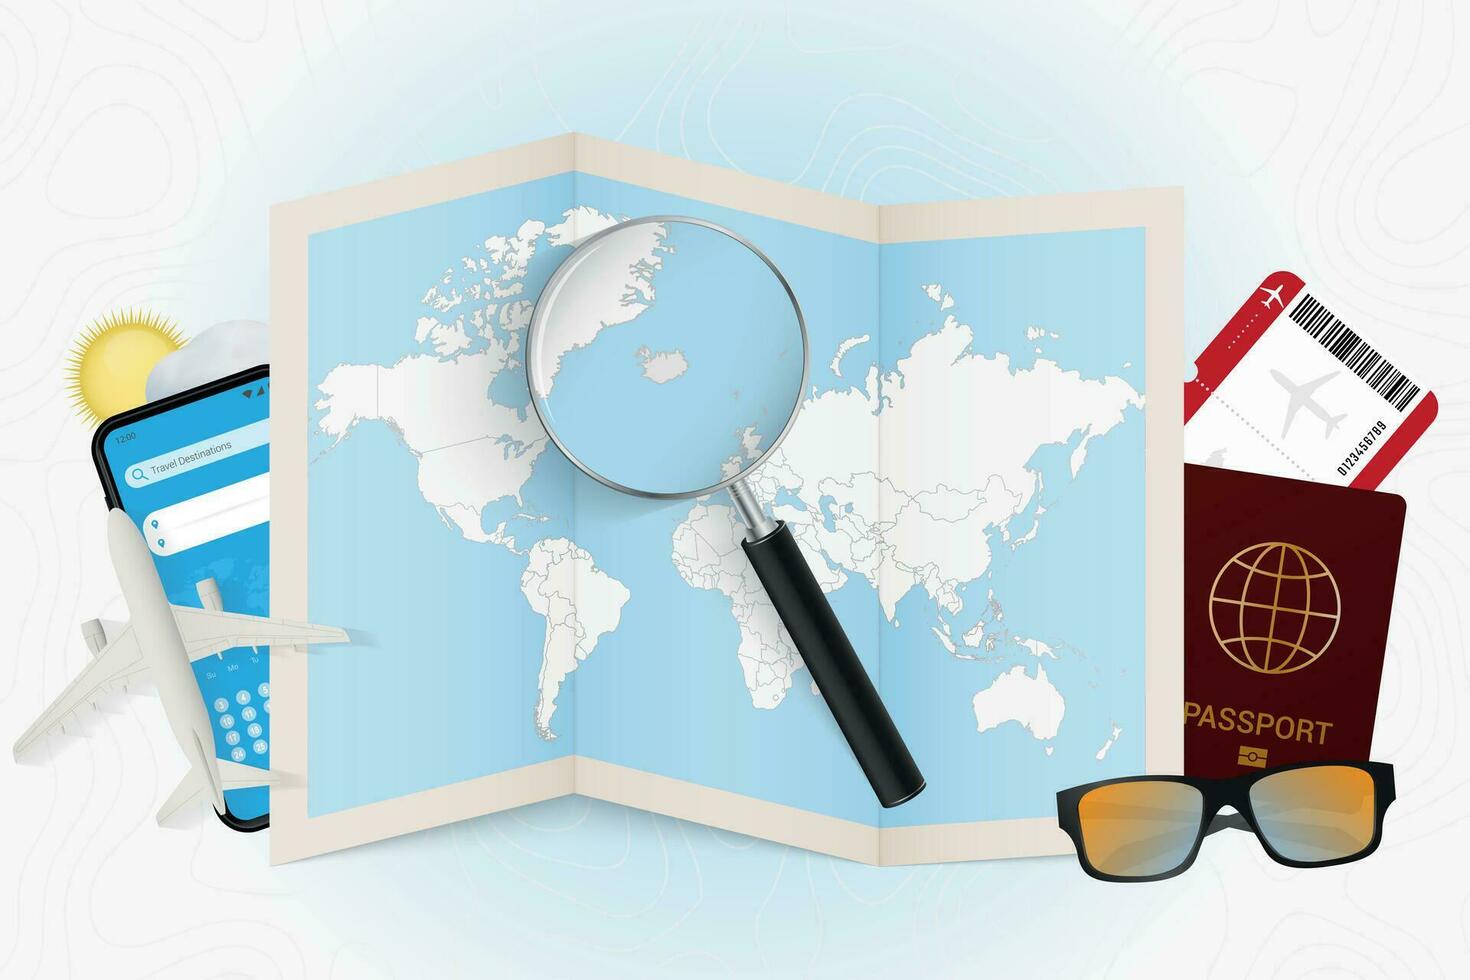 Travel destination Iceland, tourism mockup with travel equipment and world map with magnifying glass on a Iceland. vector